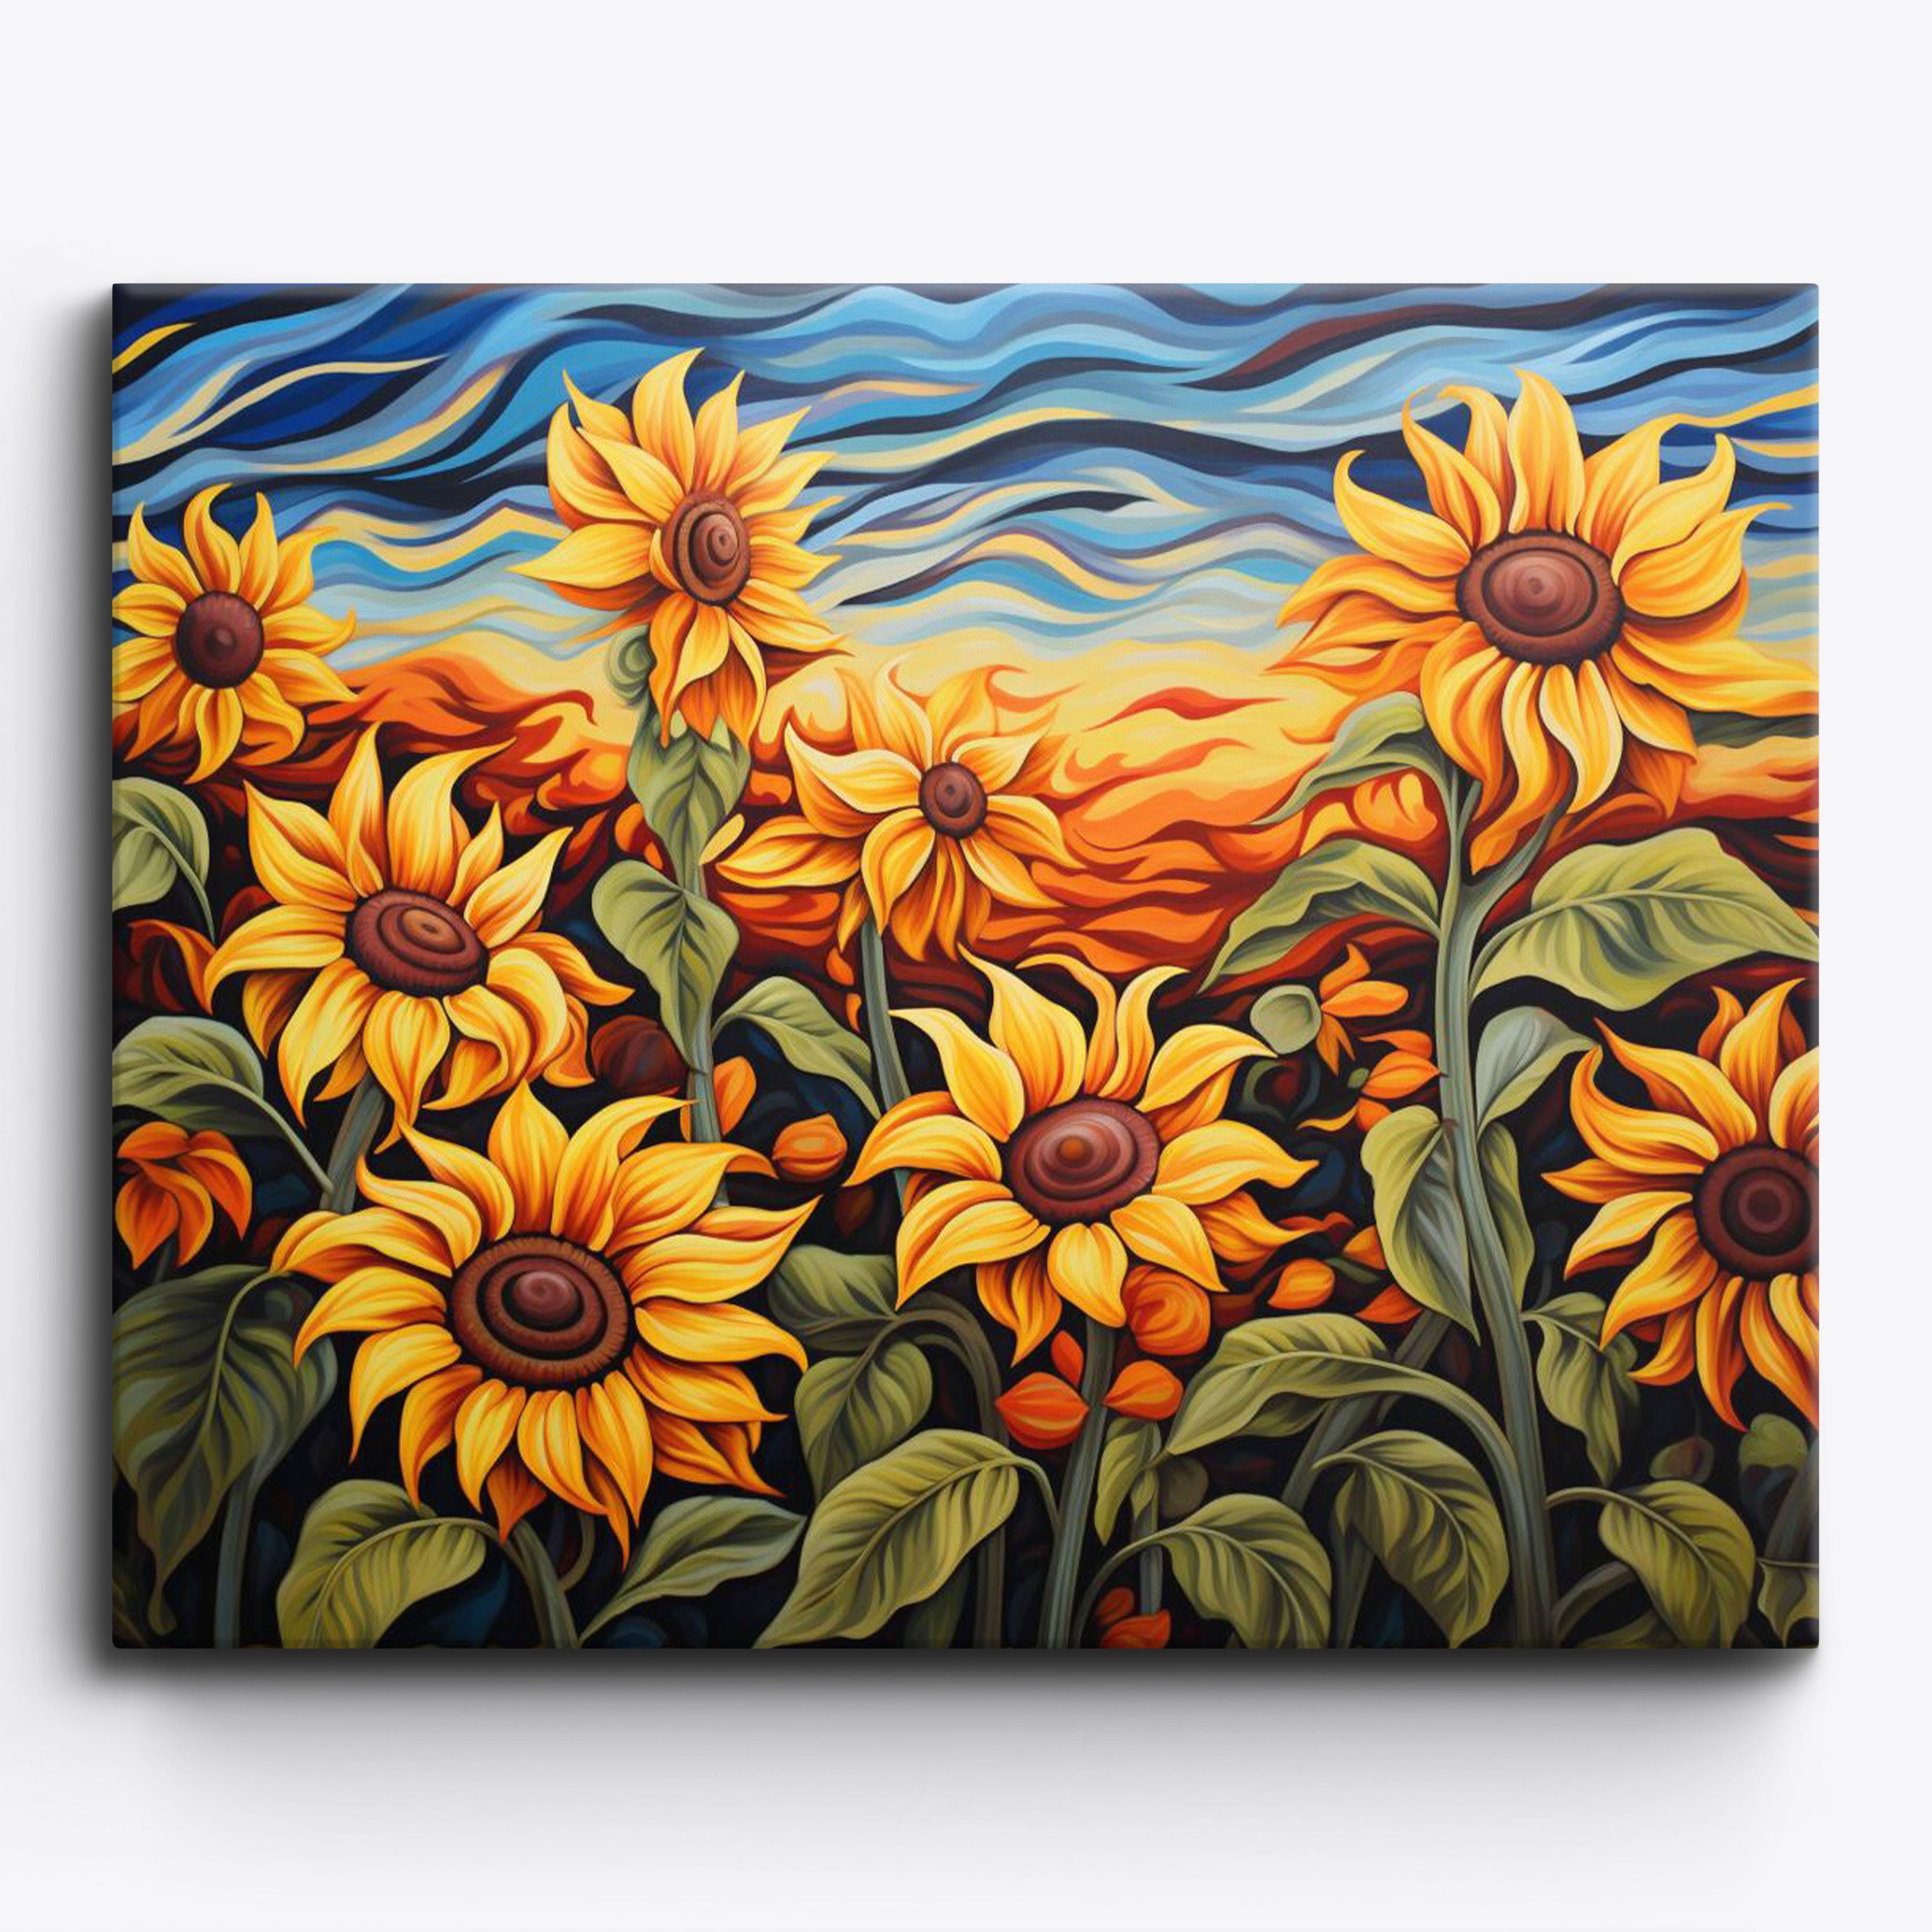 Abstract Sunflowers Dance No Frame